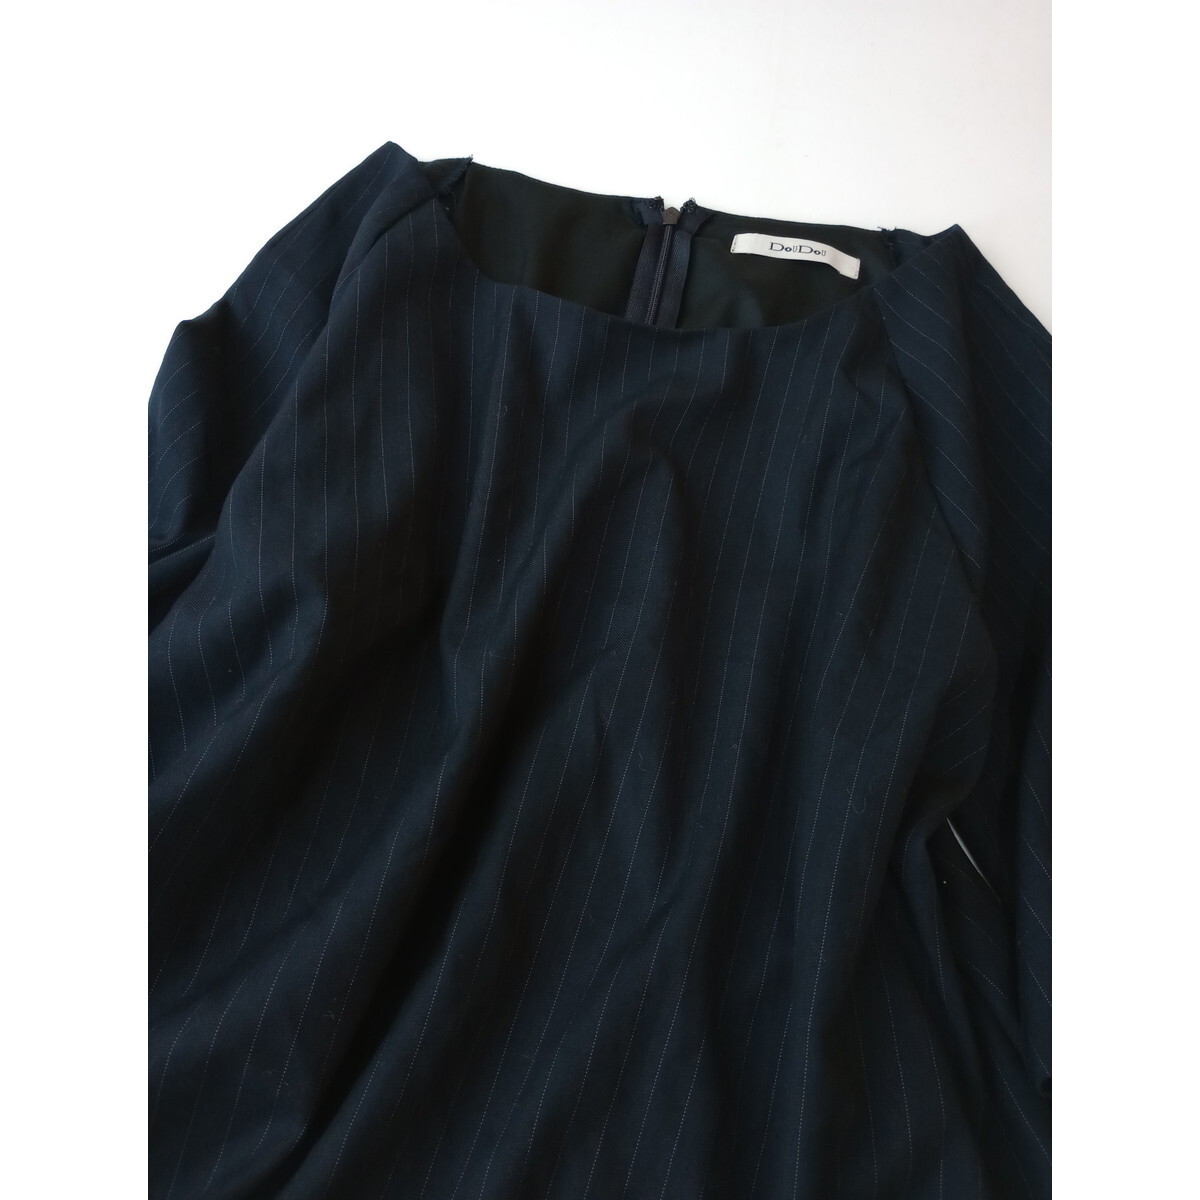 DOUDOUdudu[ comfortably adult ......]s Try play yard short sleeves all-in-one combination nezon navy navy blue (29Y+0107)